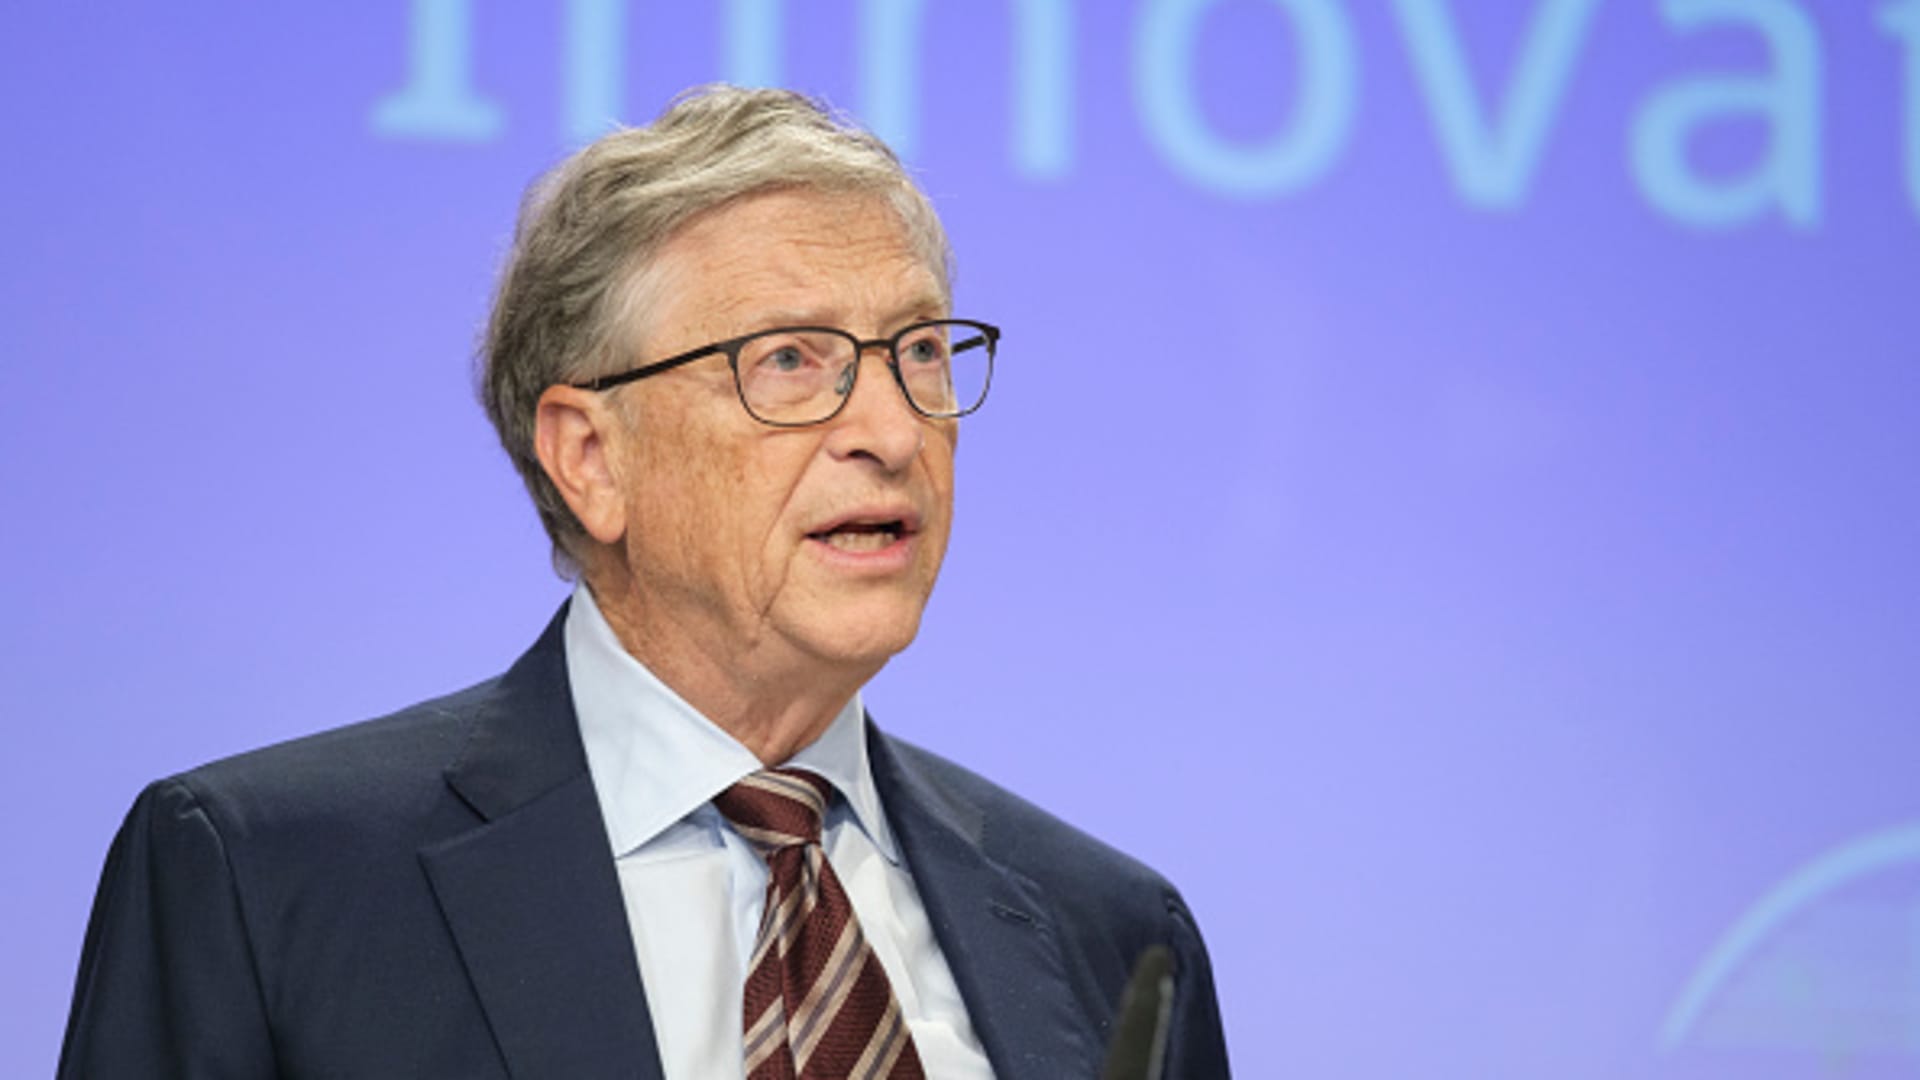 Bill Gates shares his ‘big hope’ for COP28 as world leaders gather for climate talks